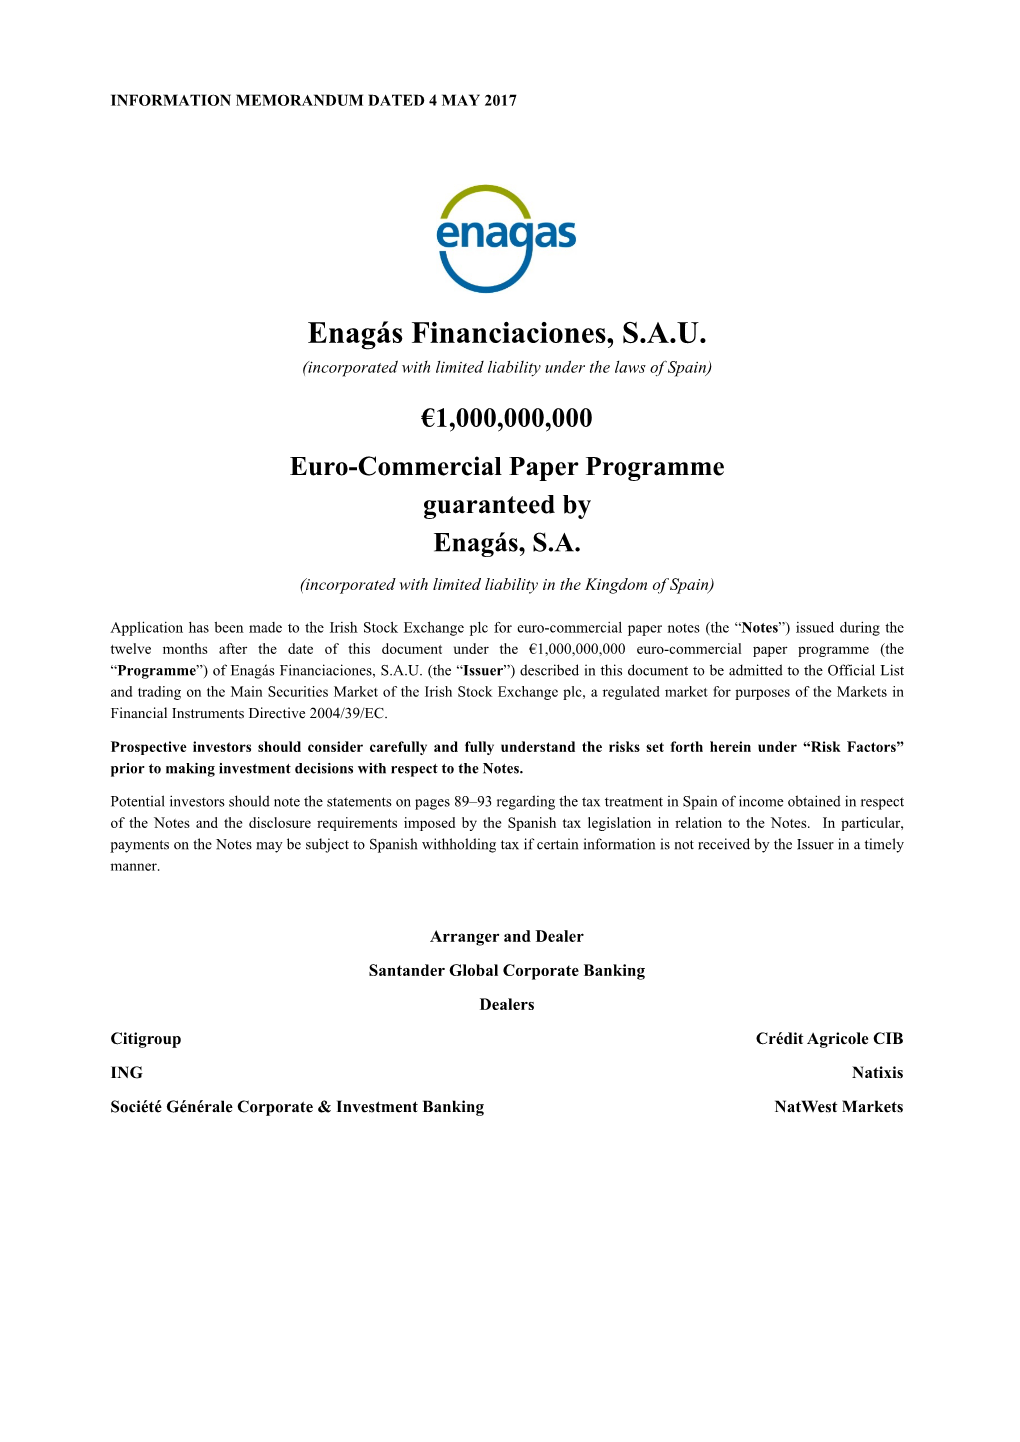 Enagás Financiaciones, S.A.U. (Incorporated with Limited Liability Under the Laws of Spain)